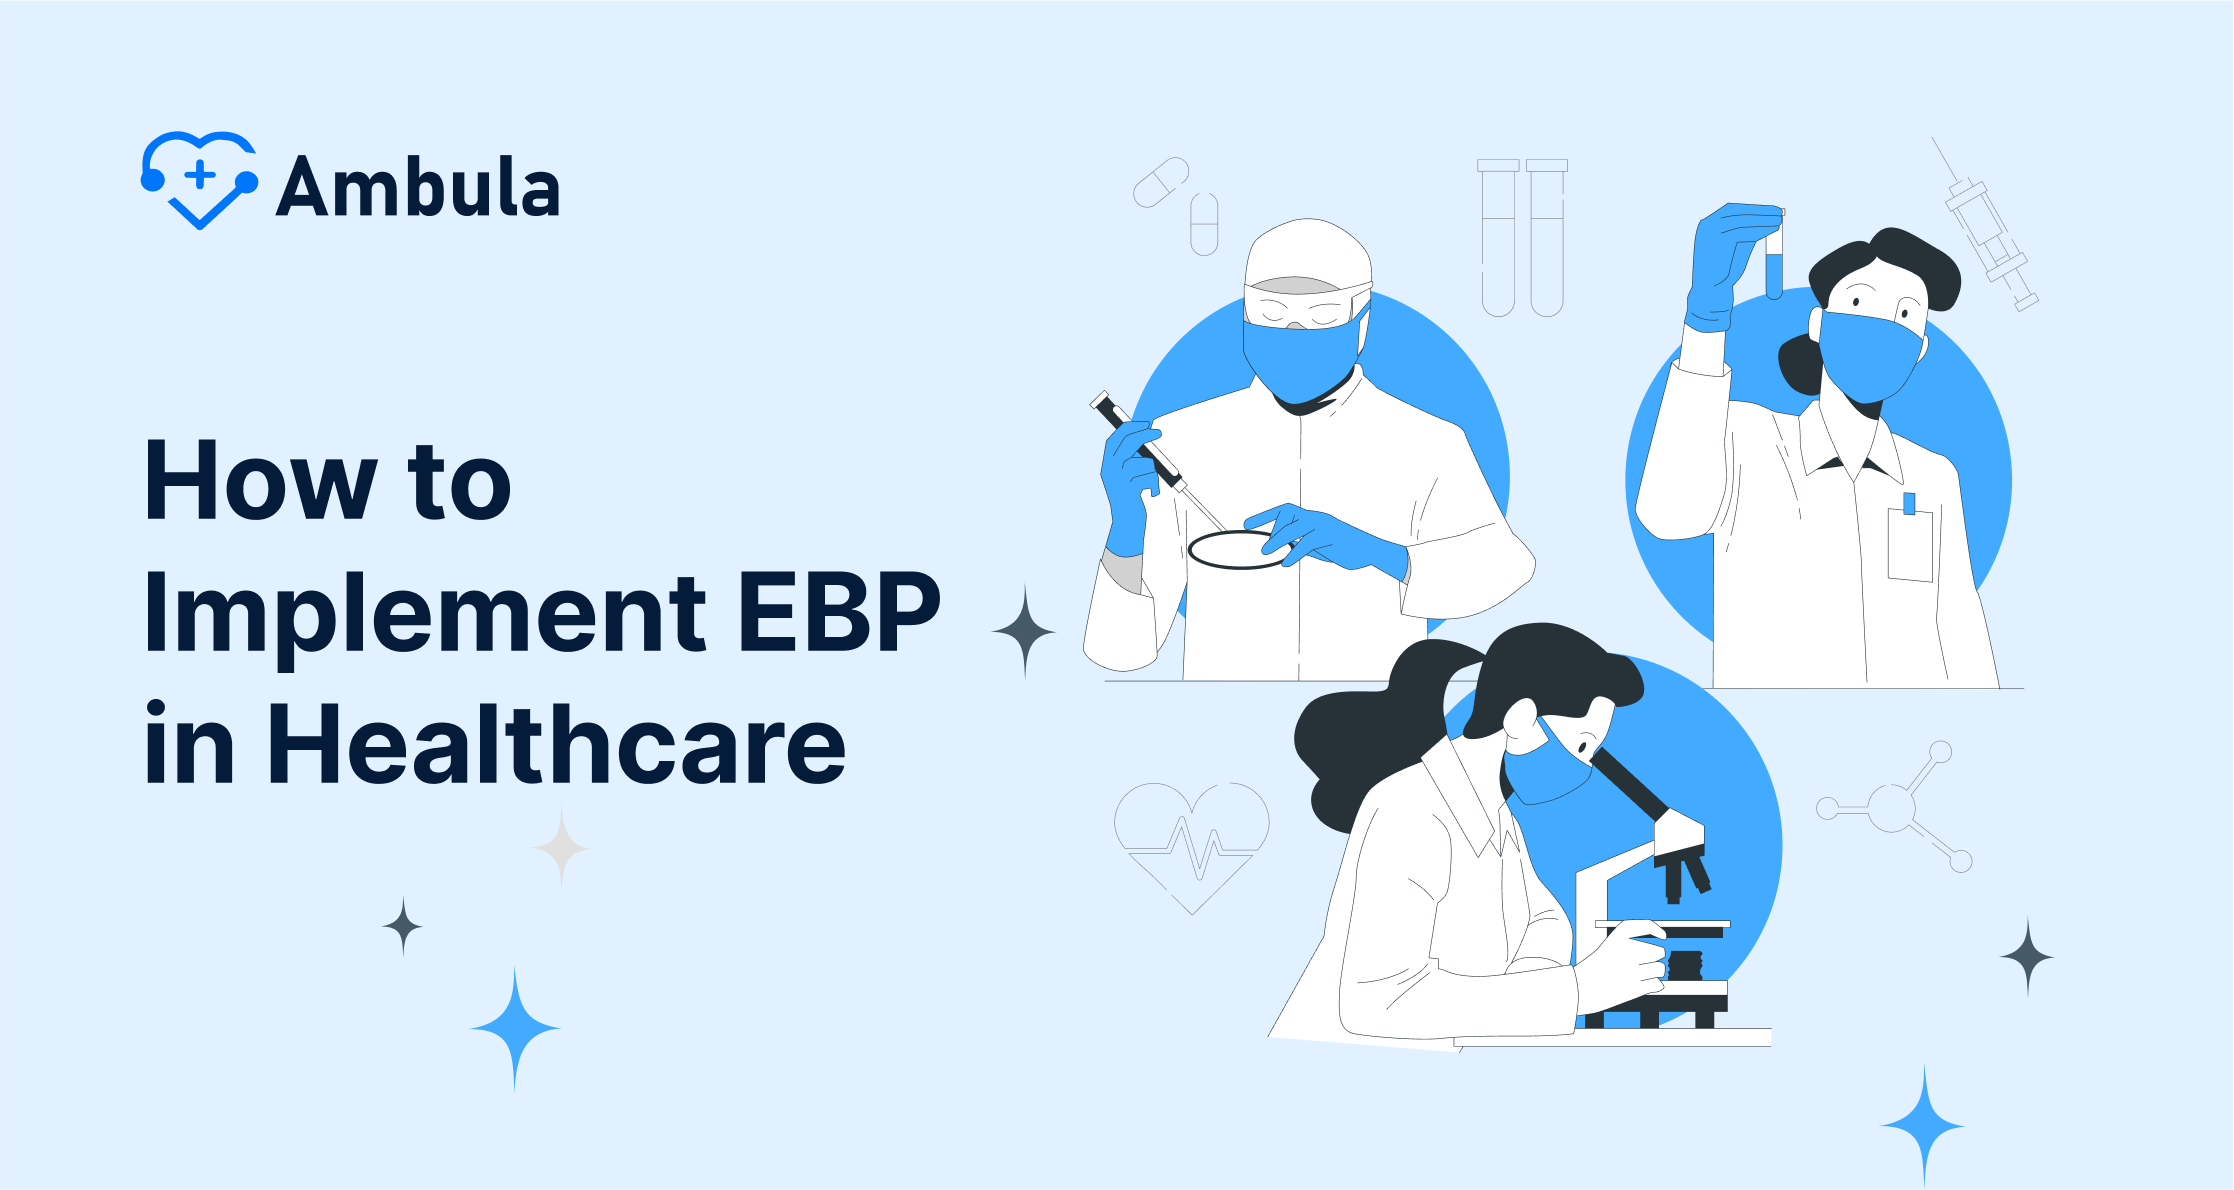 How to Implement EBP in Healthcare